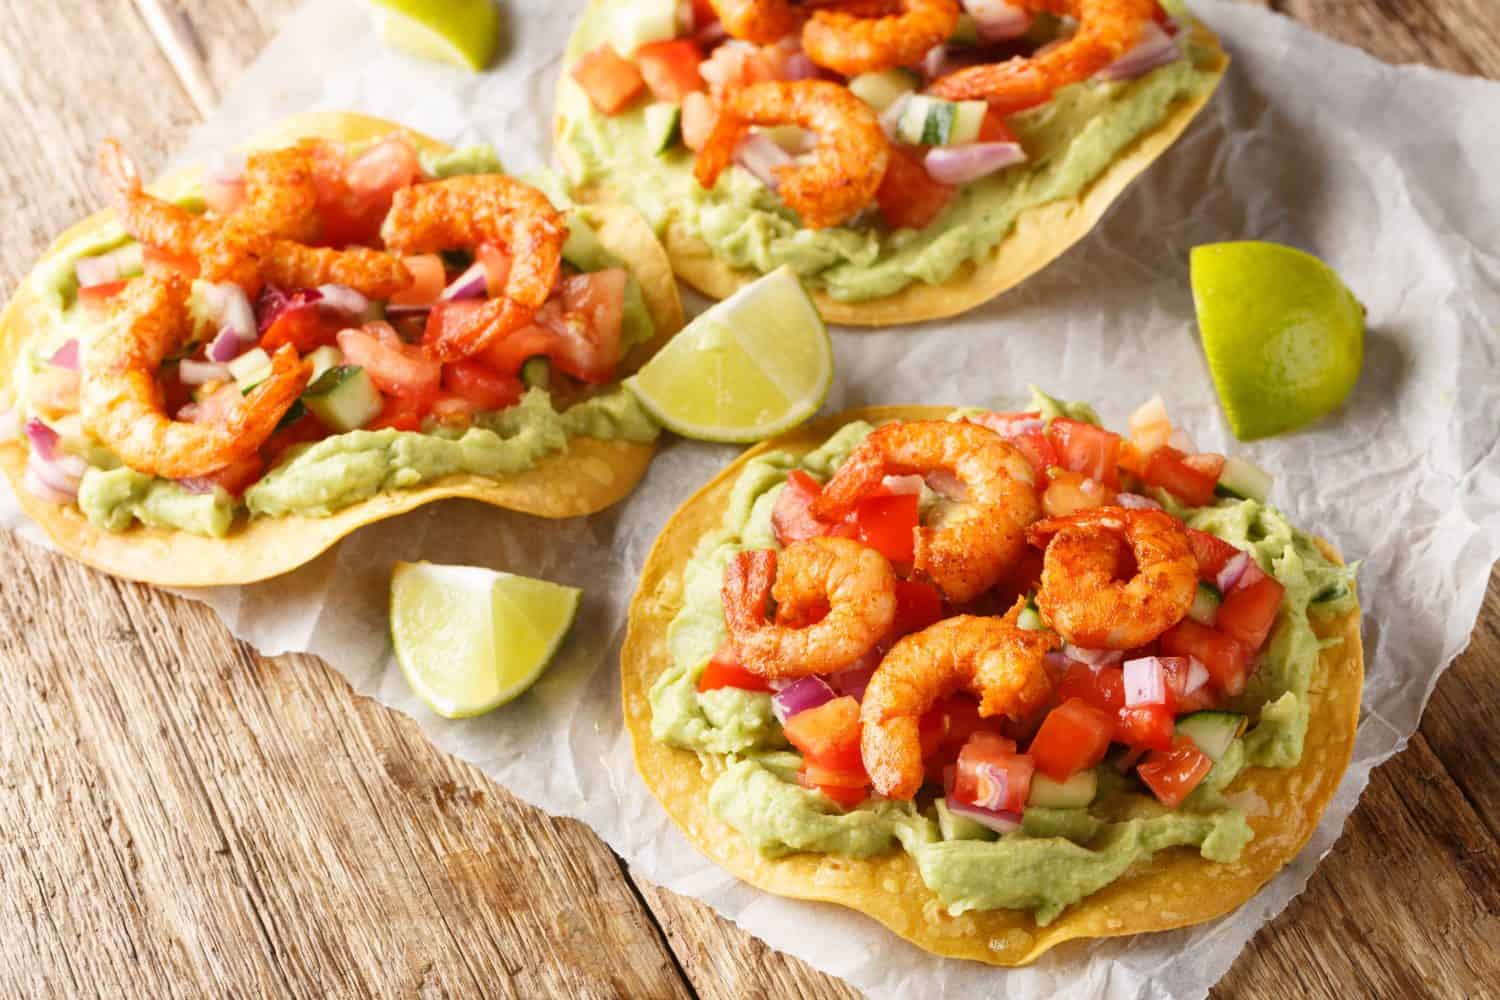 Tostadas with shrimps, tomato salsa and guacamole close-up on a wooden table. Horizontal